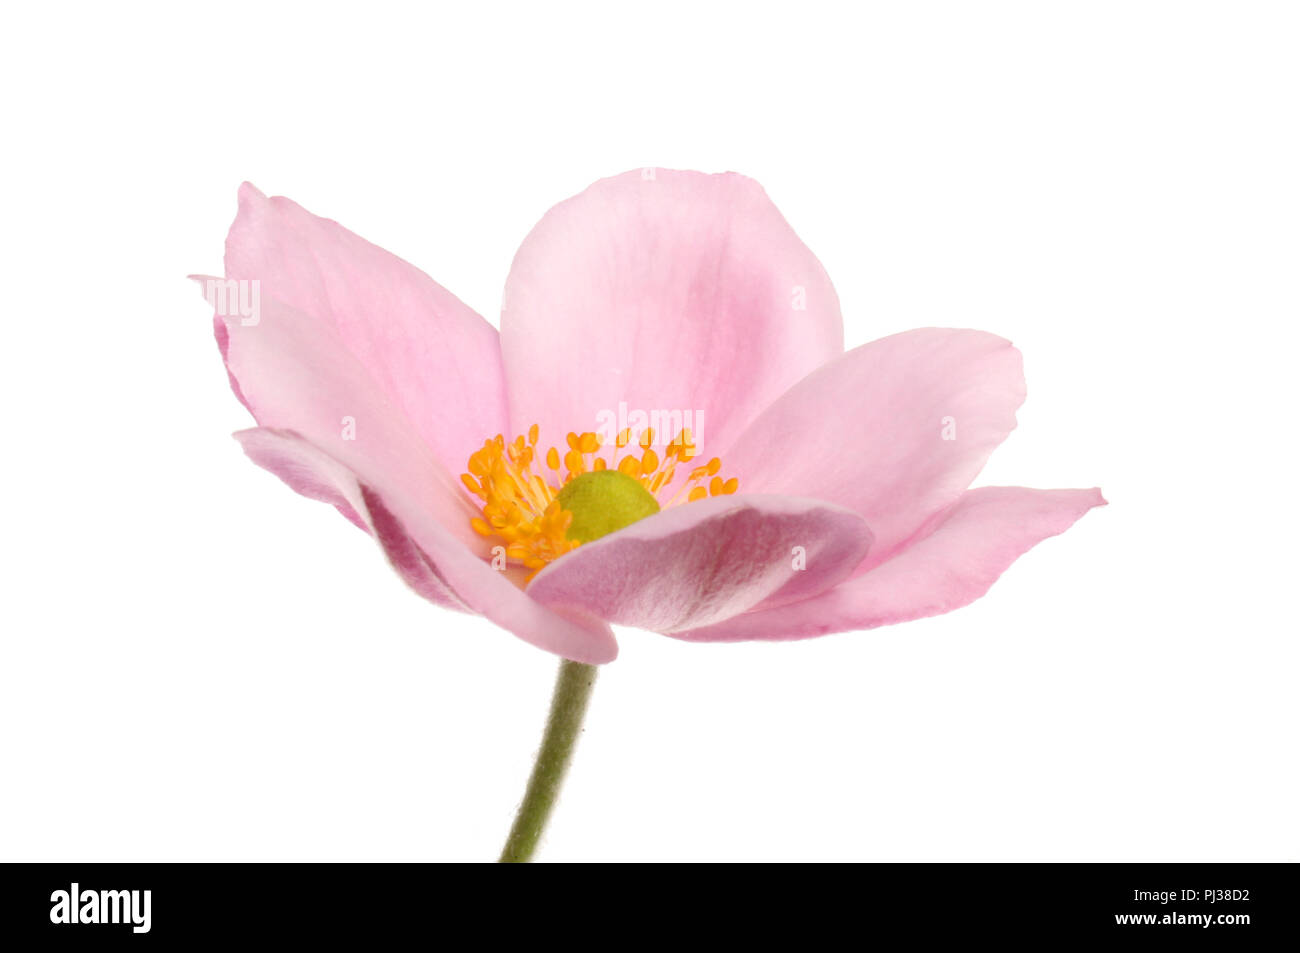 Anémone japonaise rose flower isolated on white Banque D'Images